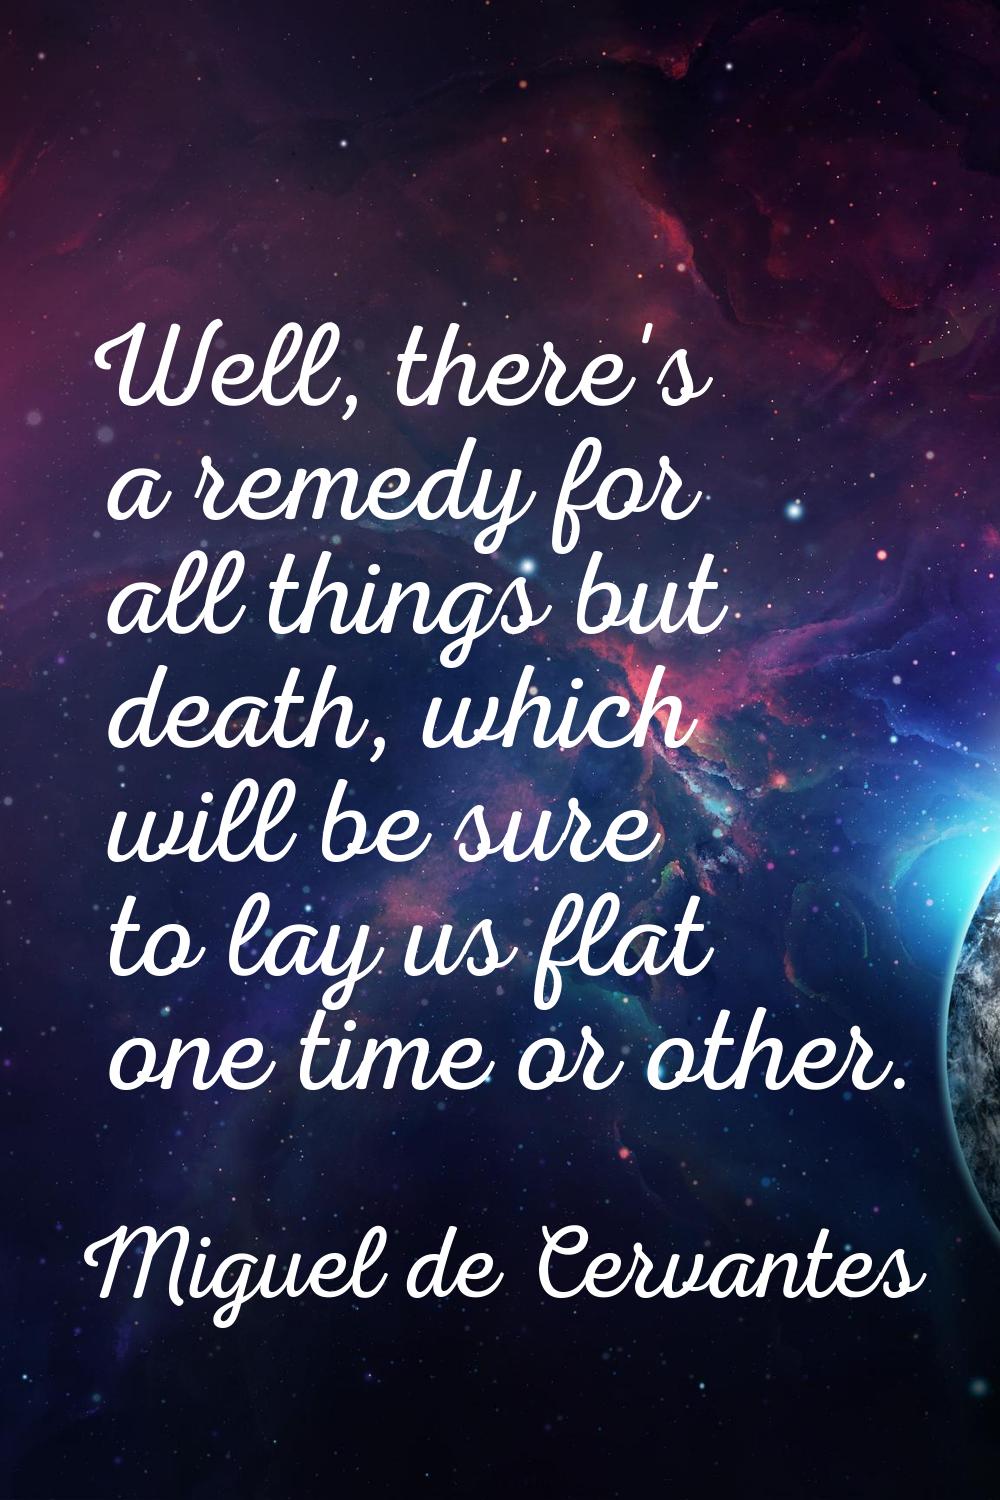 Well, there's a remedy for all things but death, which will be sure to lay us flat one time or othe